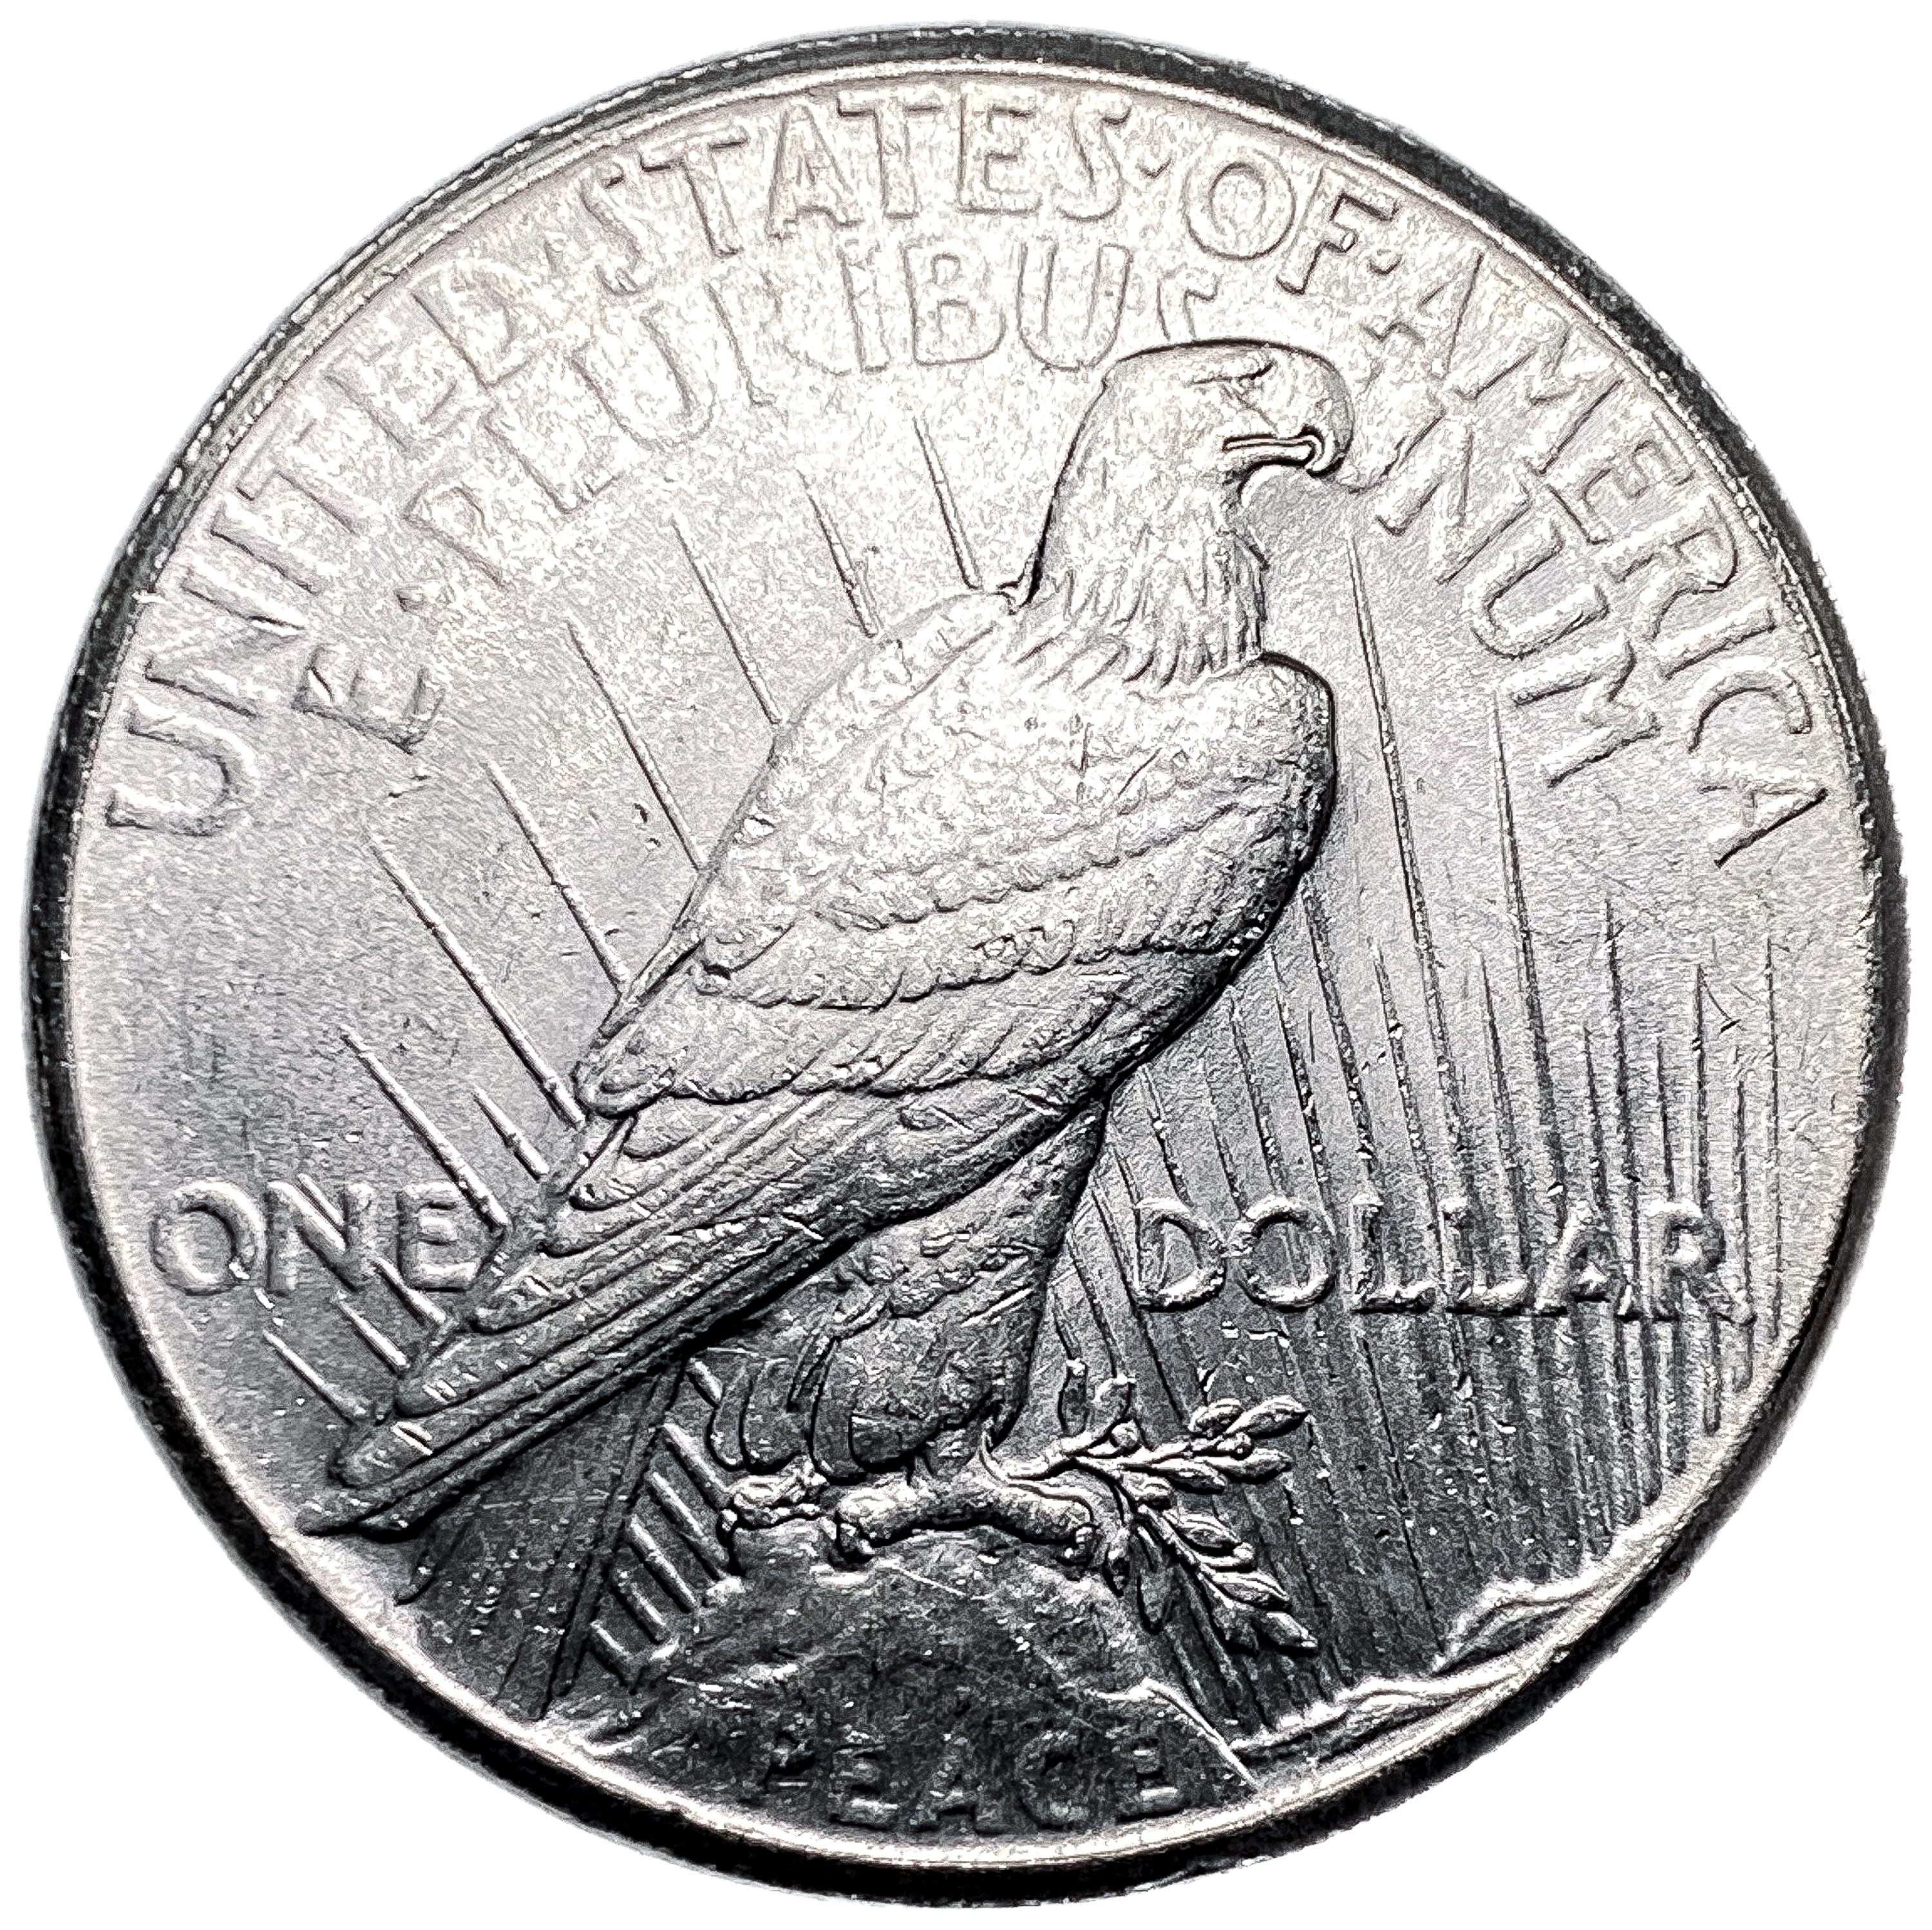 1922-1925 Peace Silver Dollars [40 Coins]